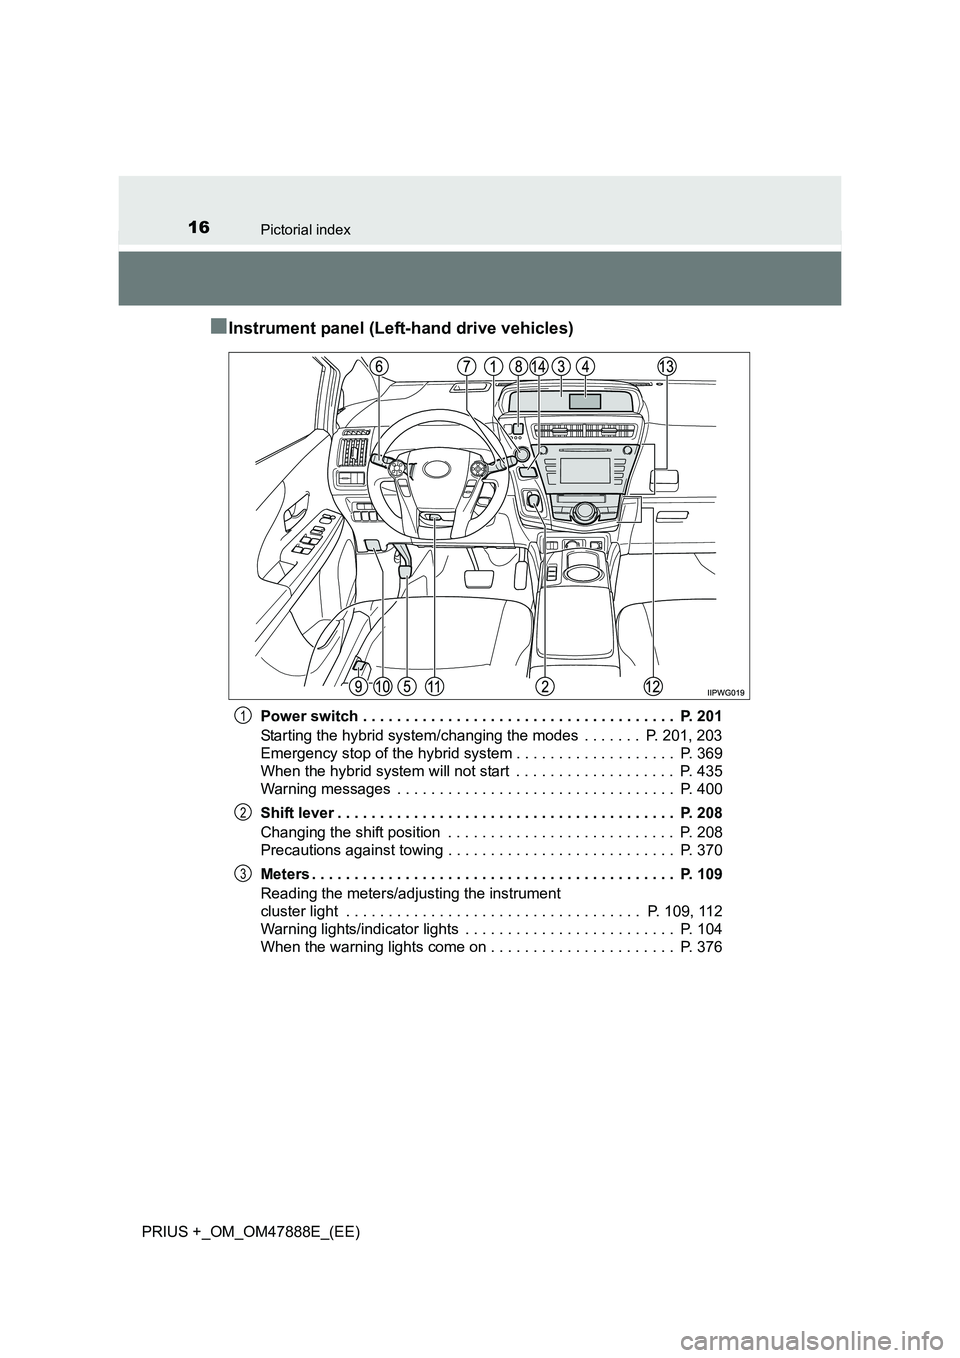 TOYOTA PRIUS PLUS 2014  Owners Manual 16Pictorial index
PRIUS +_OM_OM47888E_(EE)
■Instrument panel (Left-hand drive vehicles)
Power switch . . . . . . . . . . . . . . . . . . . . . . . . . . . . . . . . . . . . .  P. 201
Starting the hy